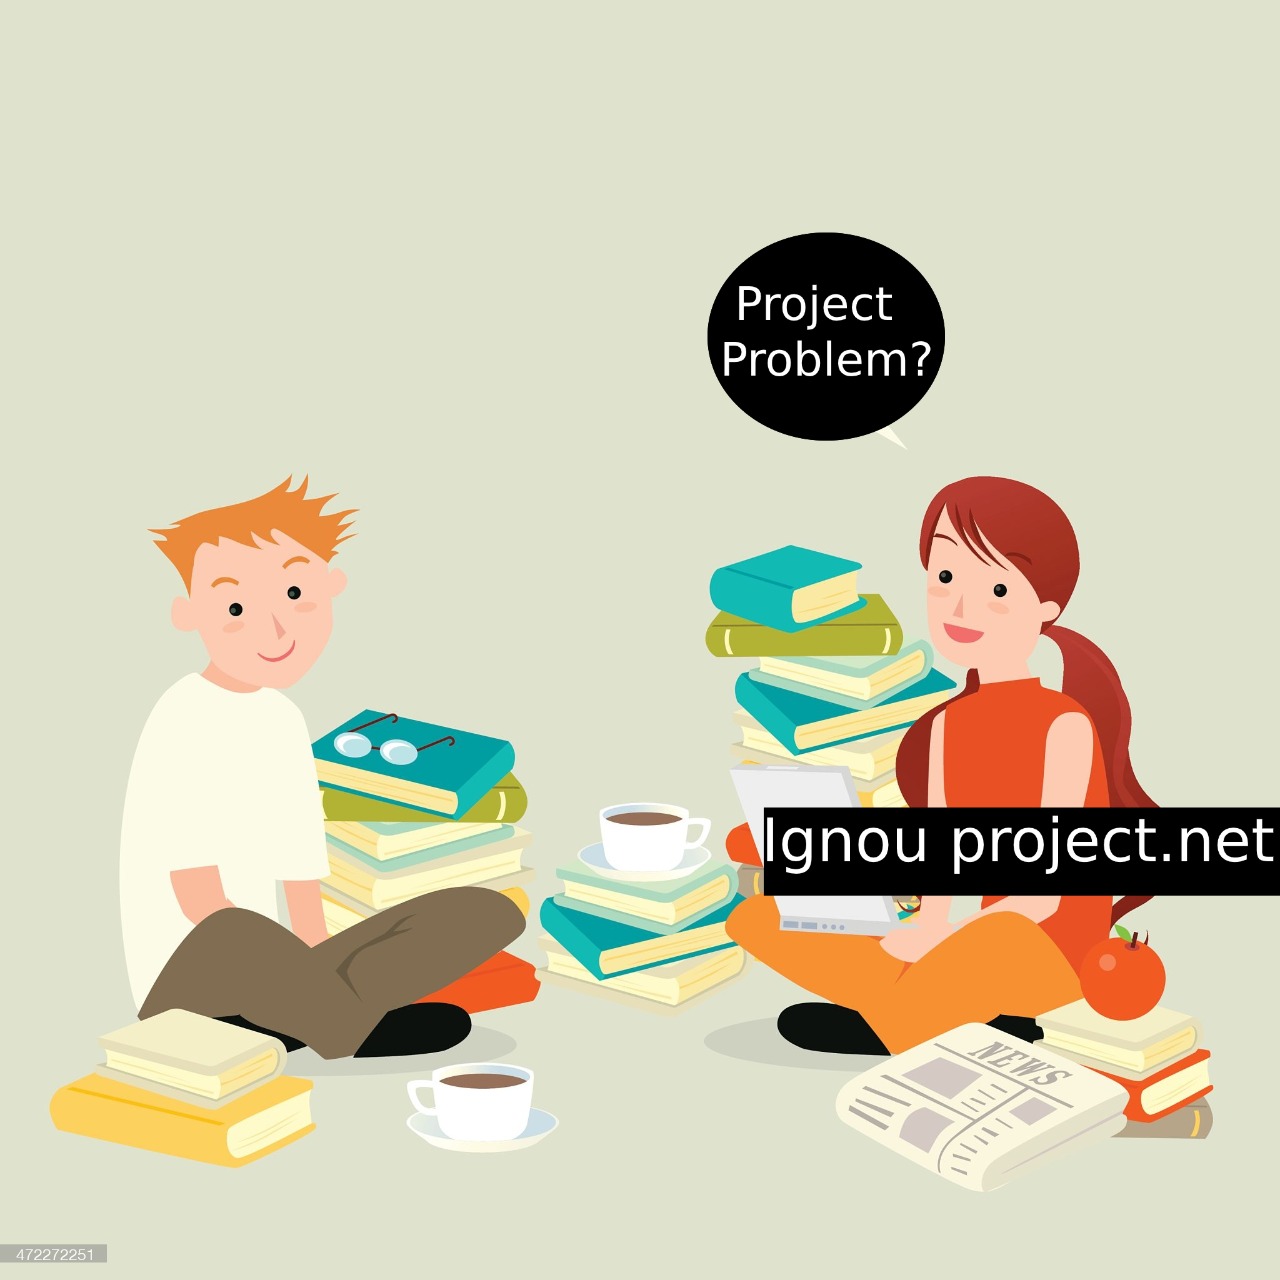 How to Submit Ignou MS100 Project